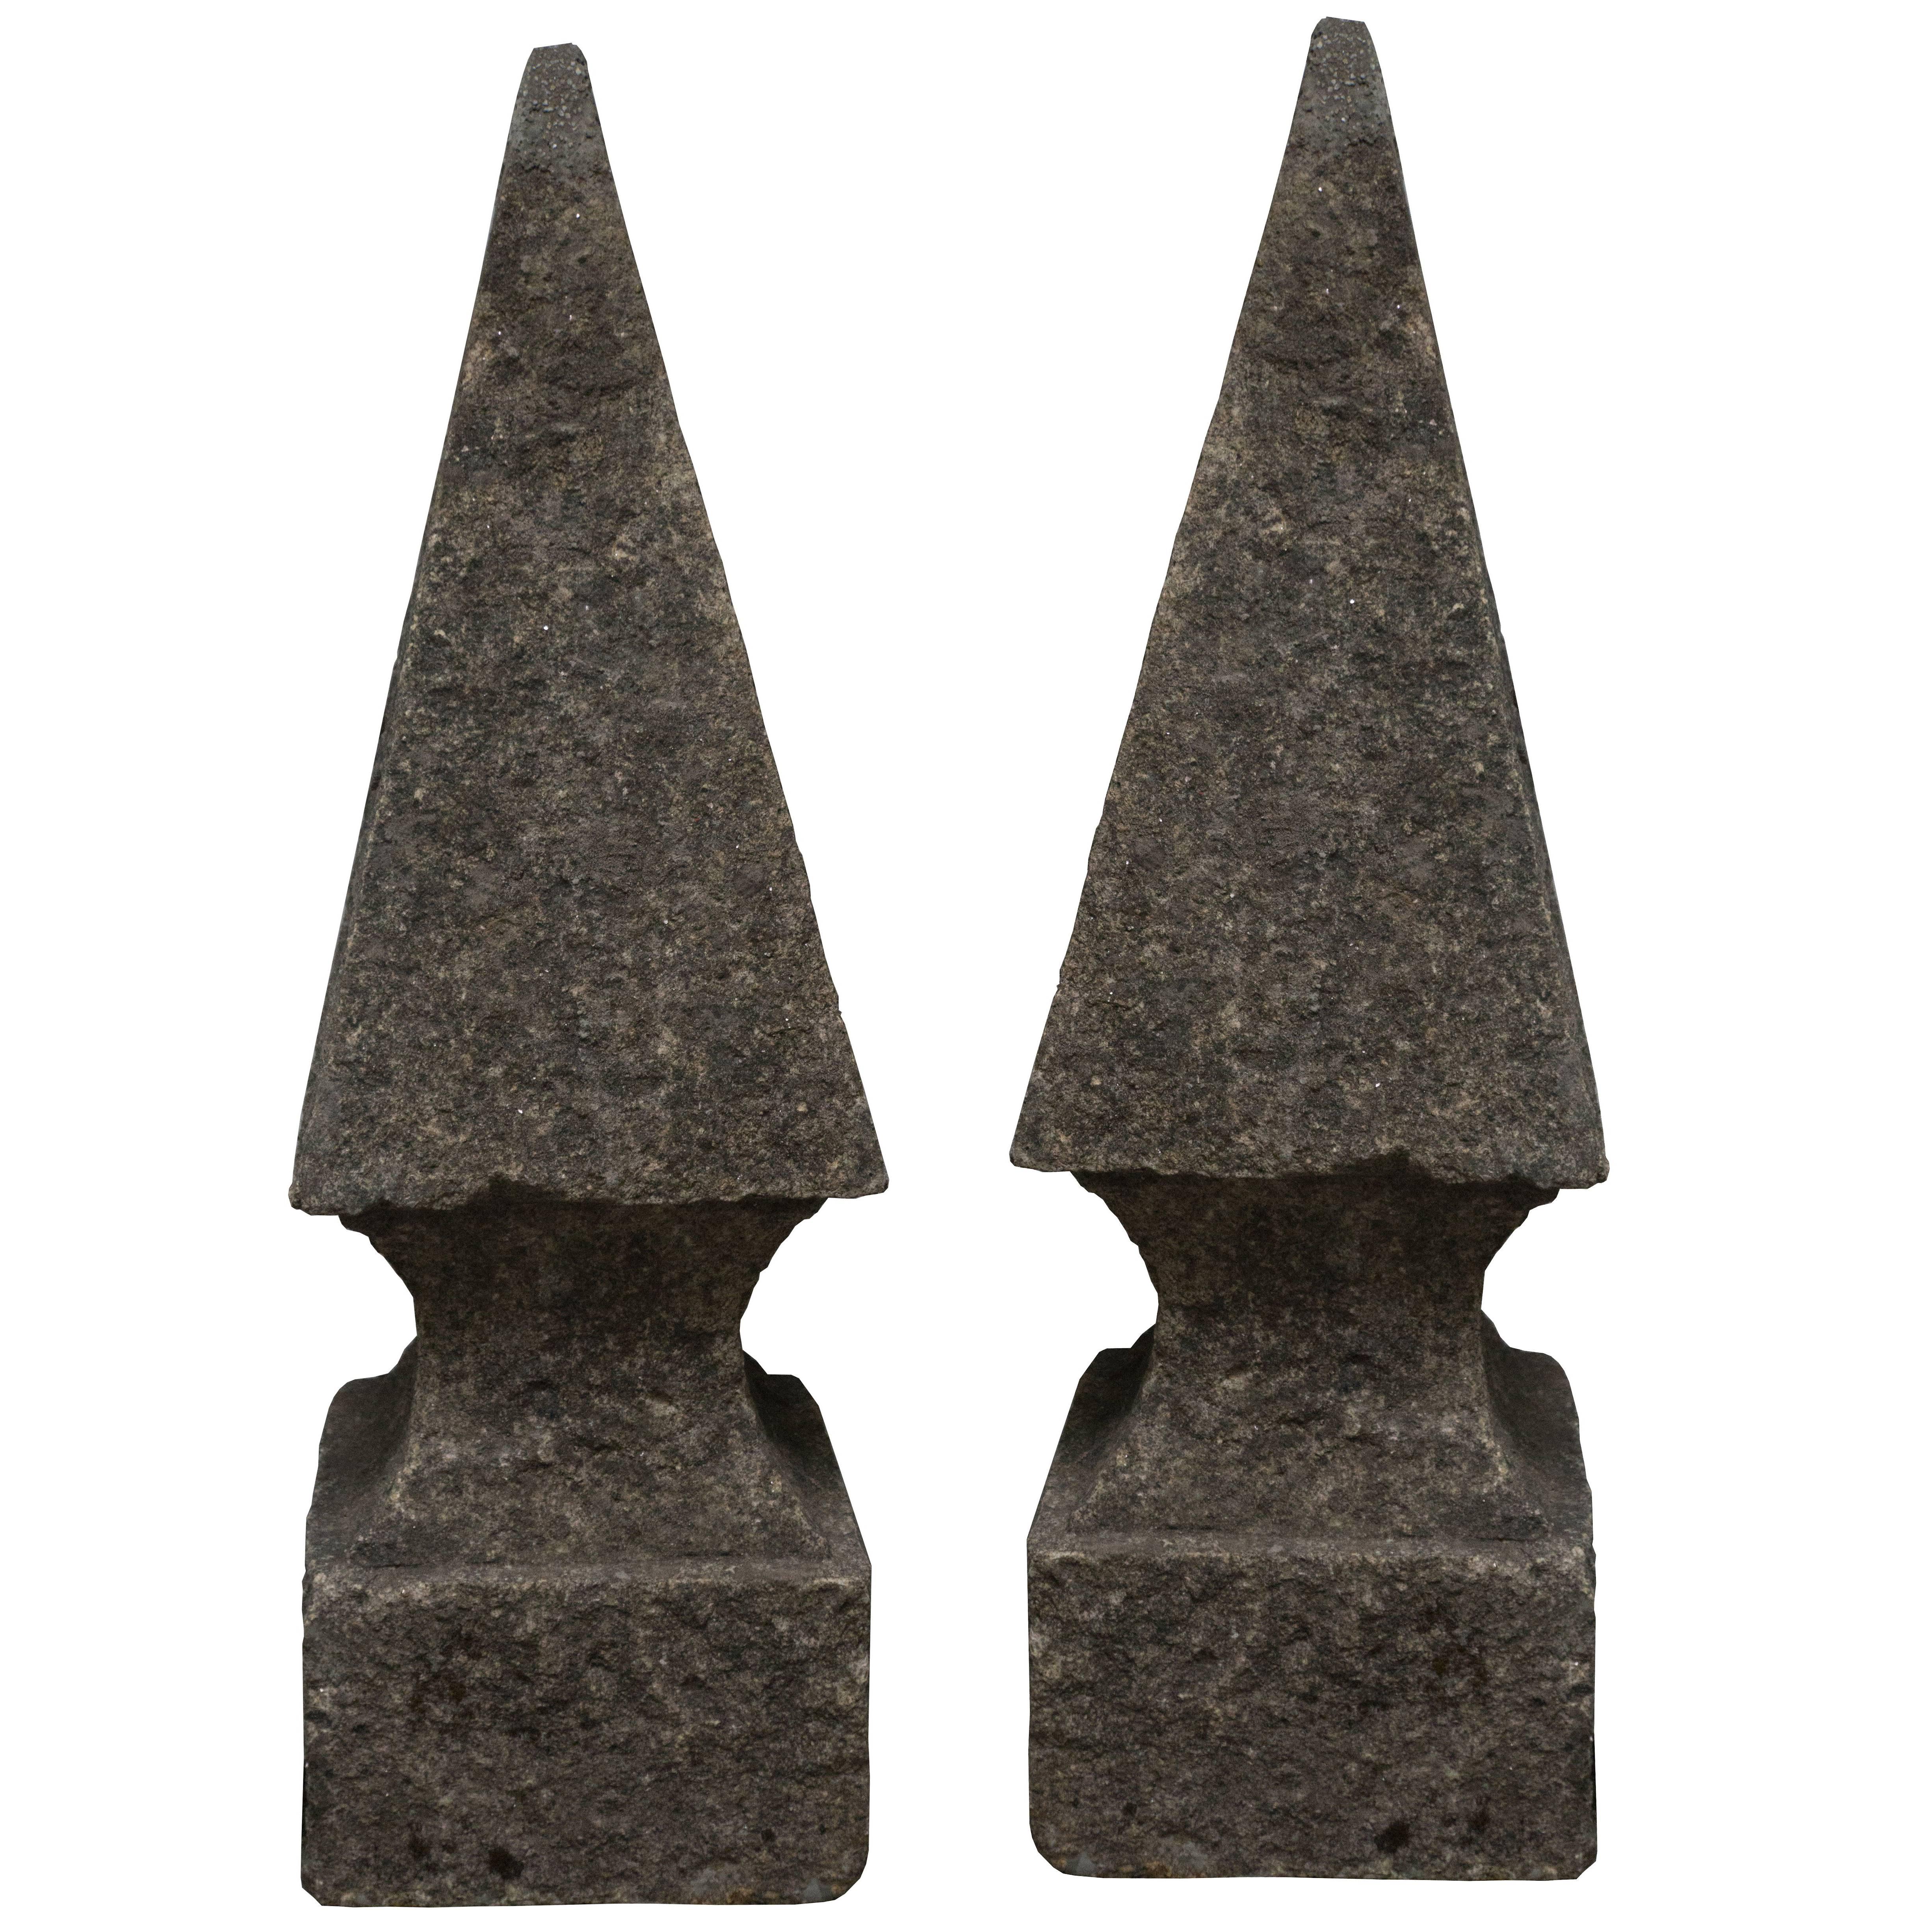 Antique Pair of Carved Stone Pyramid Finials from Porto Lima, circa 1900